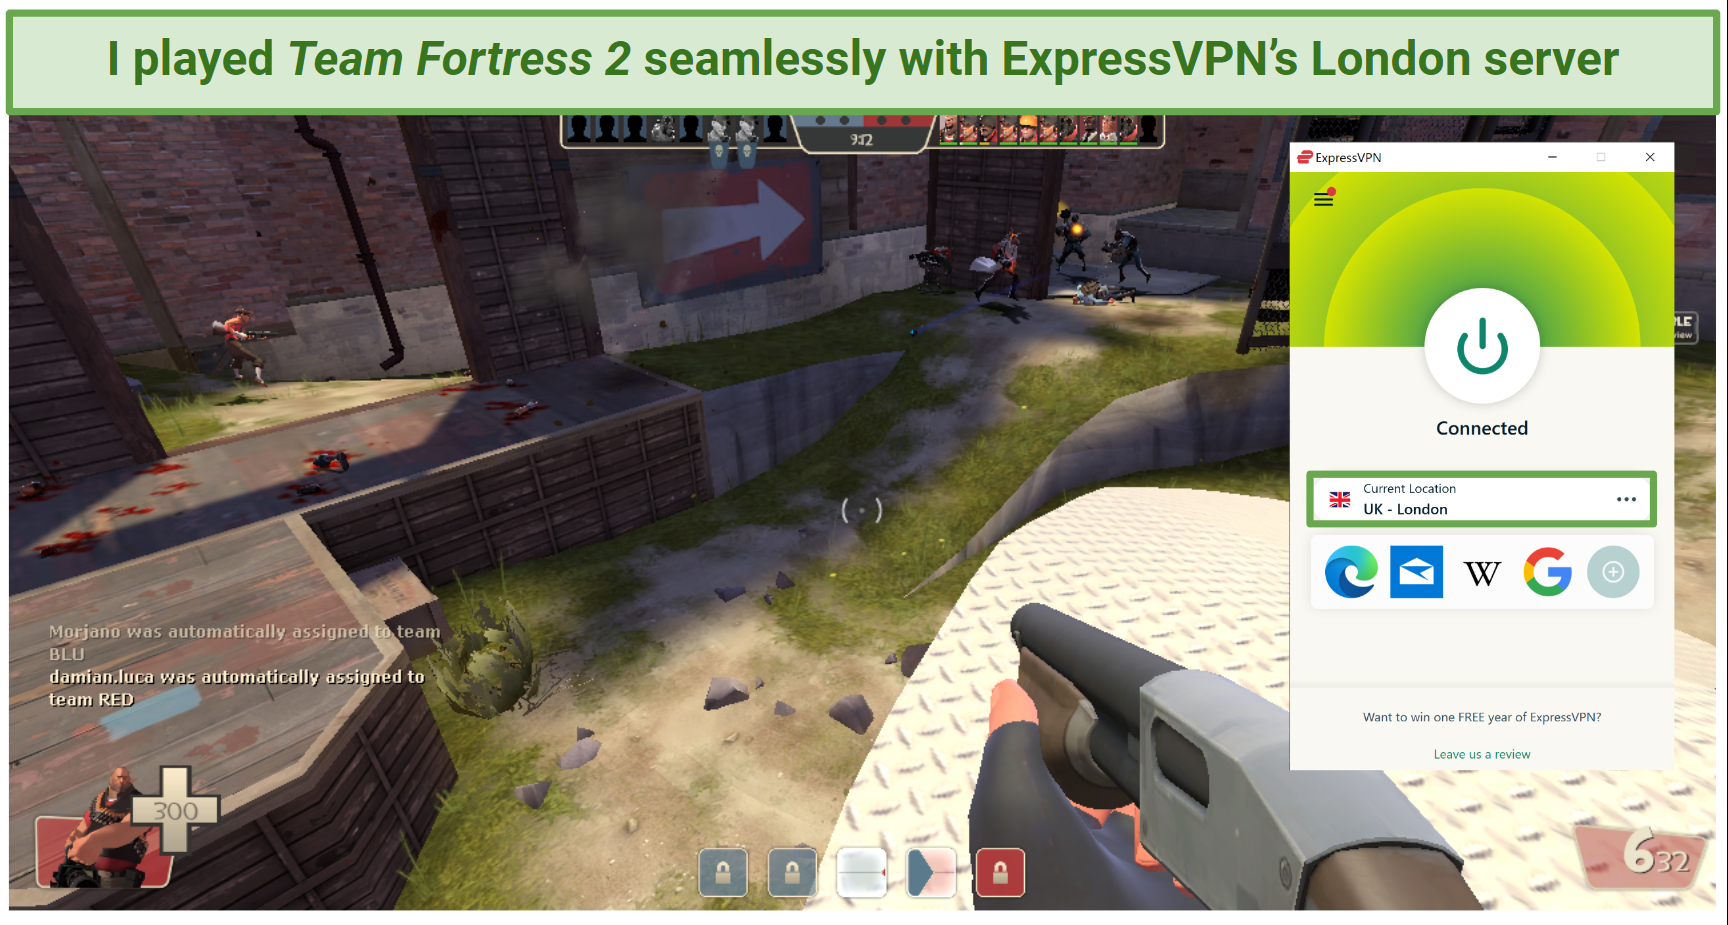 Screenshot of ExpressVPN's London server connected while gaming